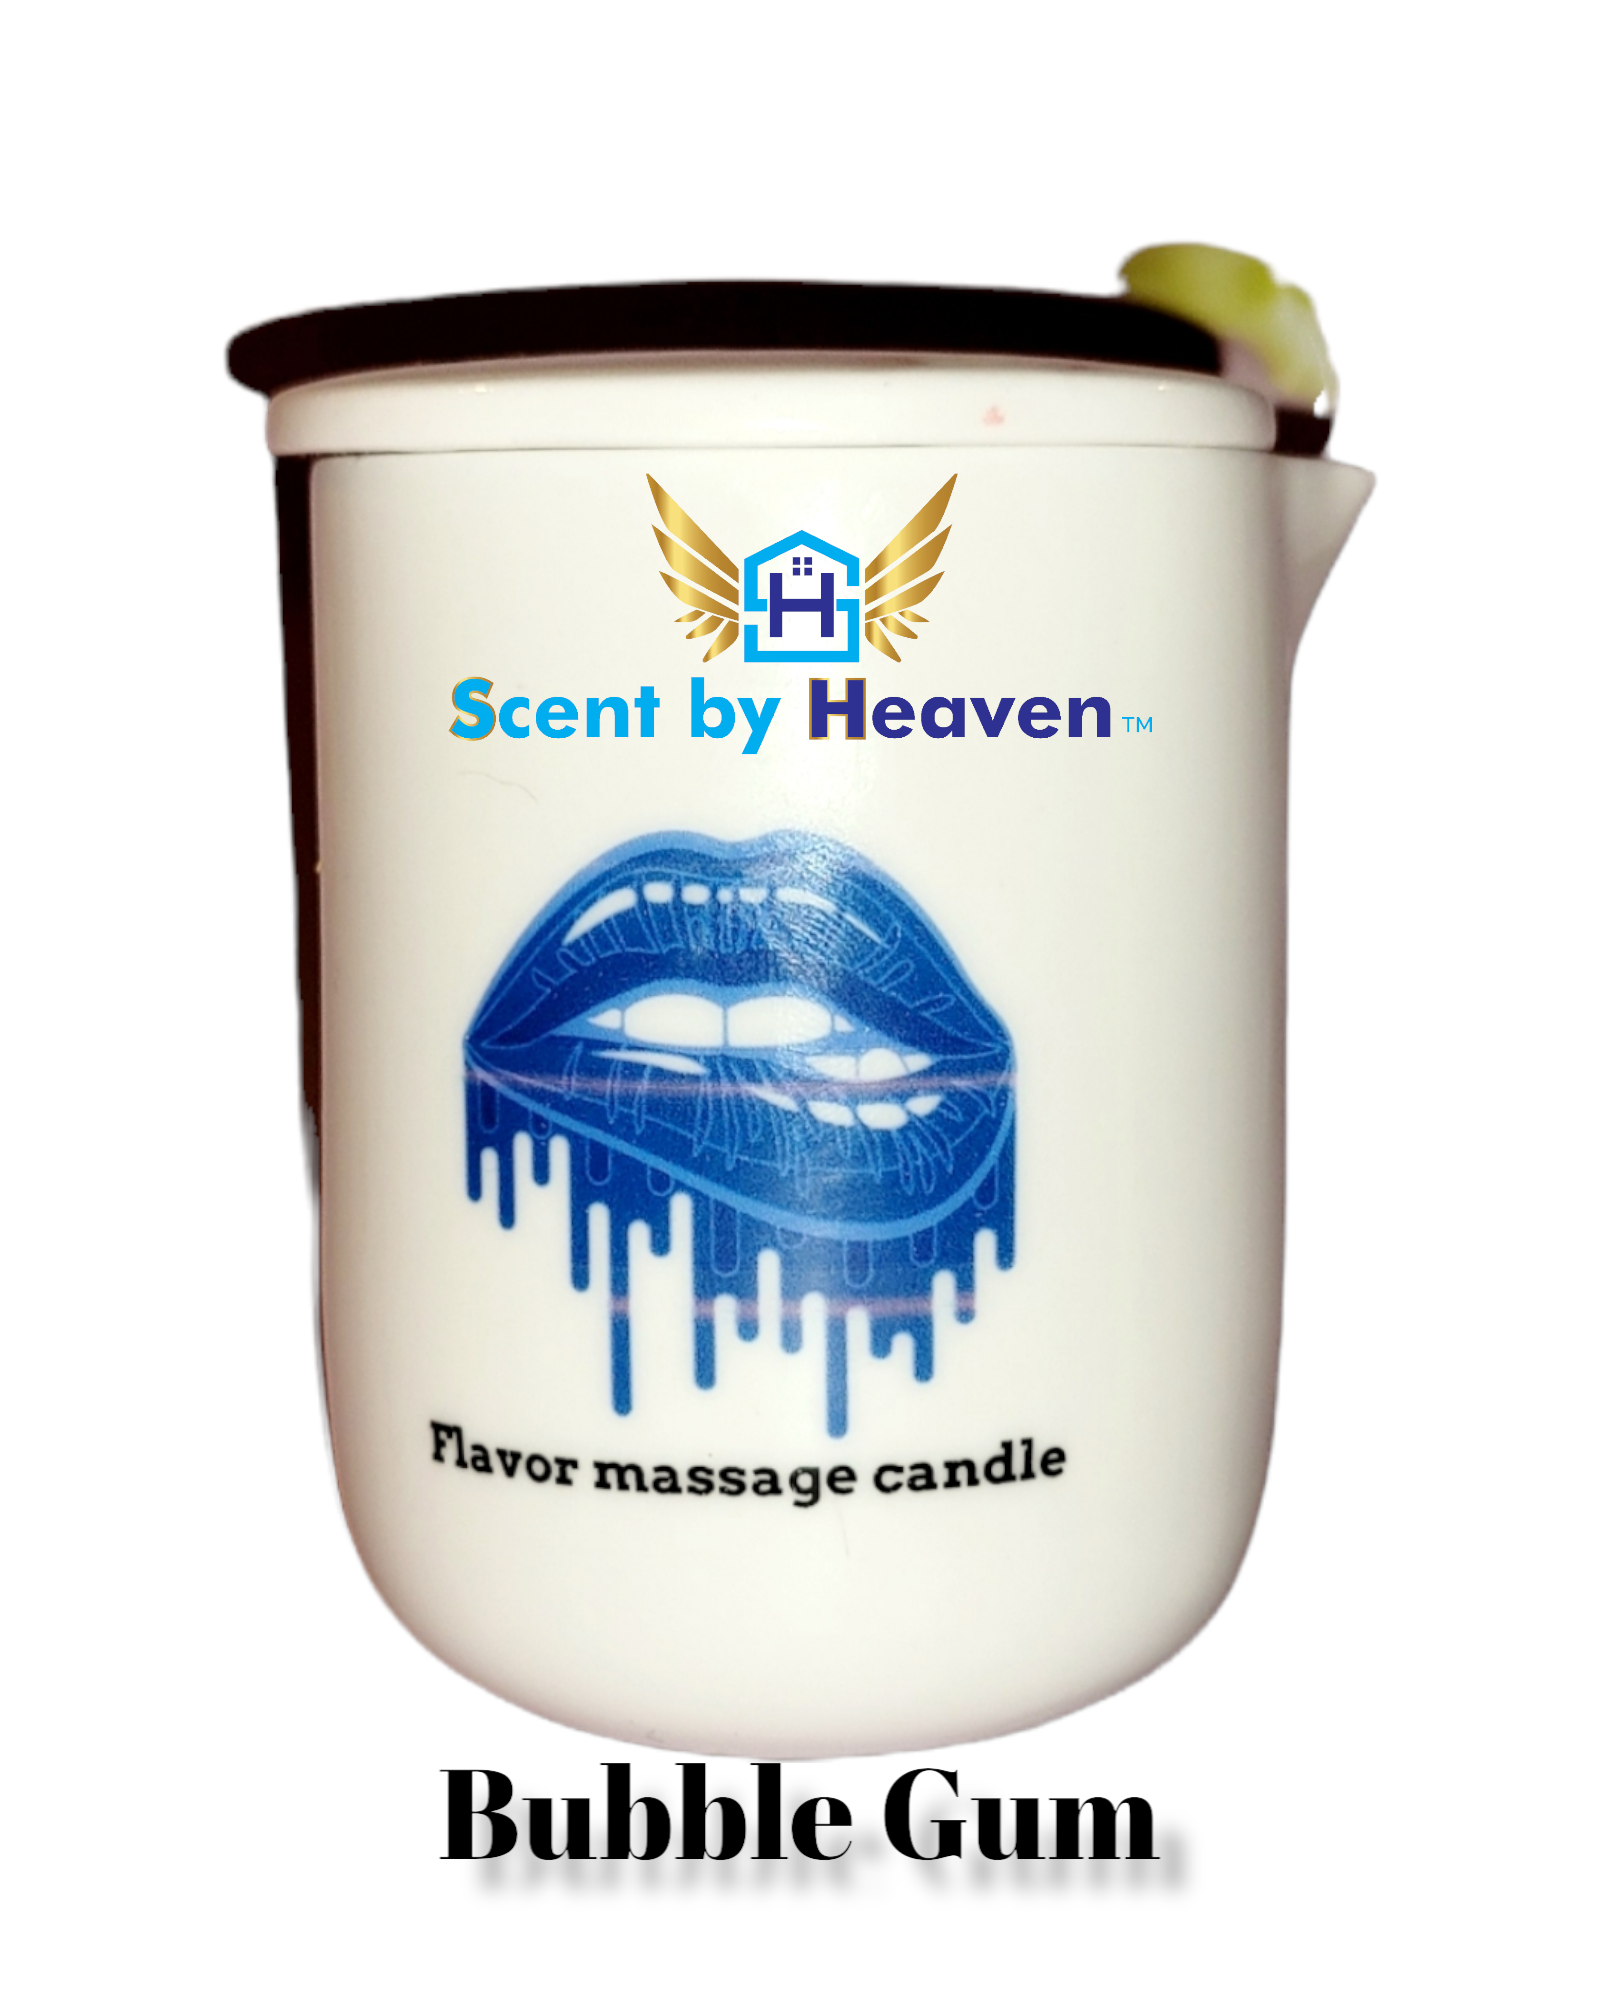 Massage flavored candle